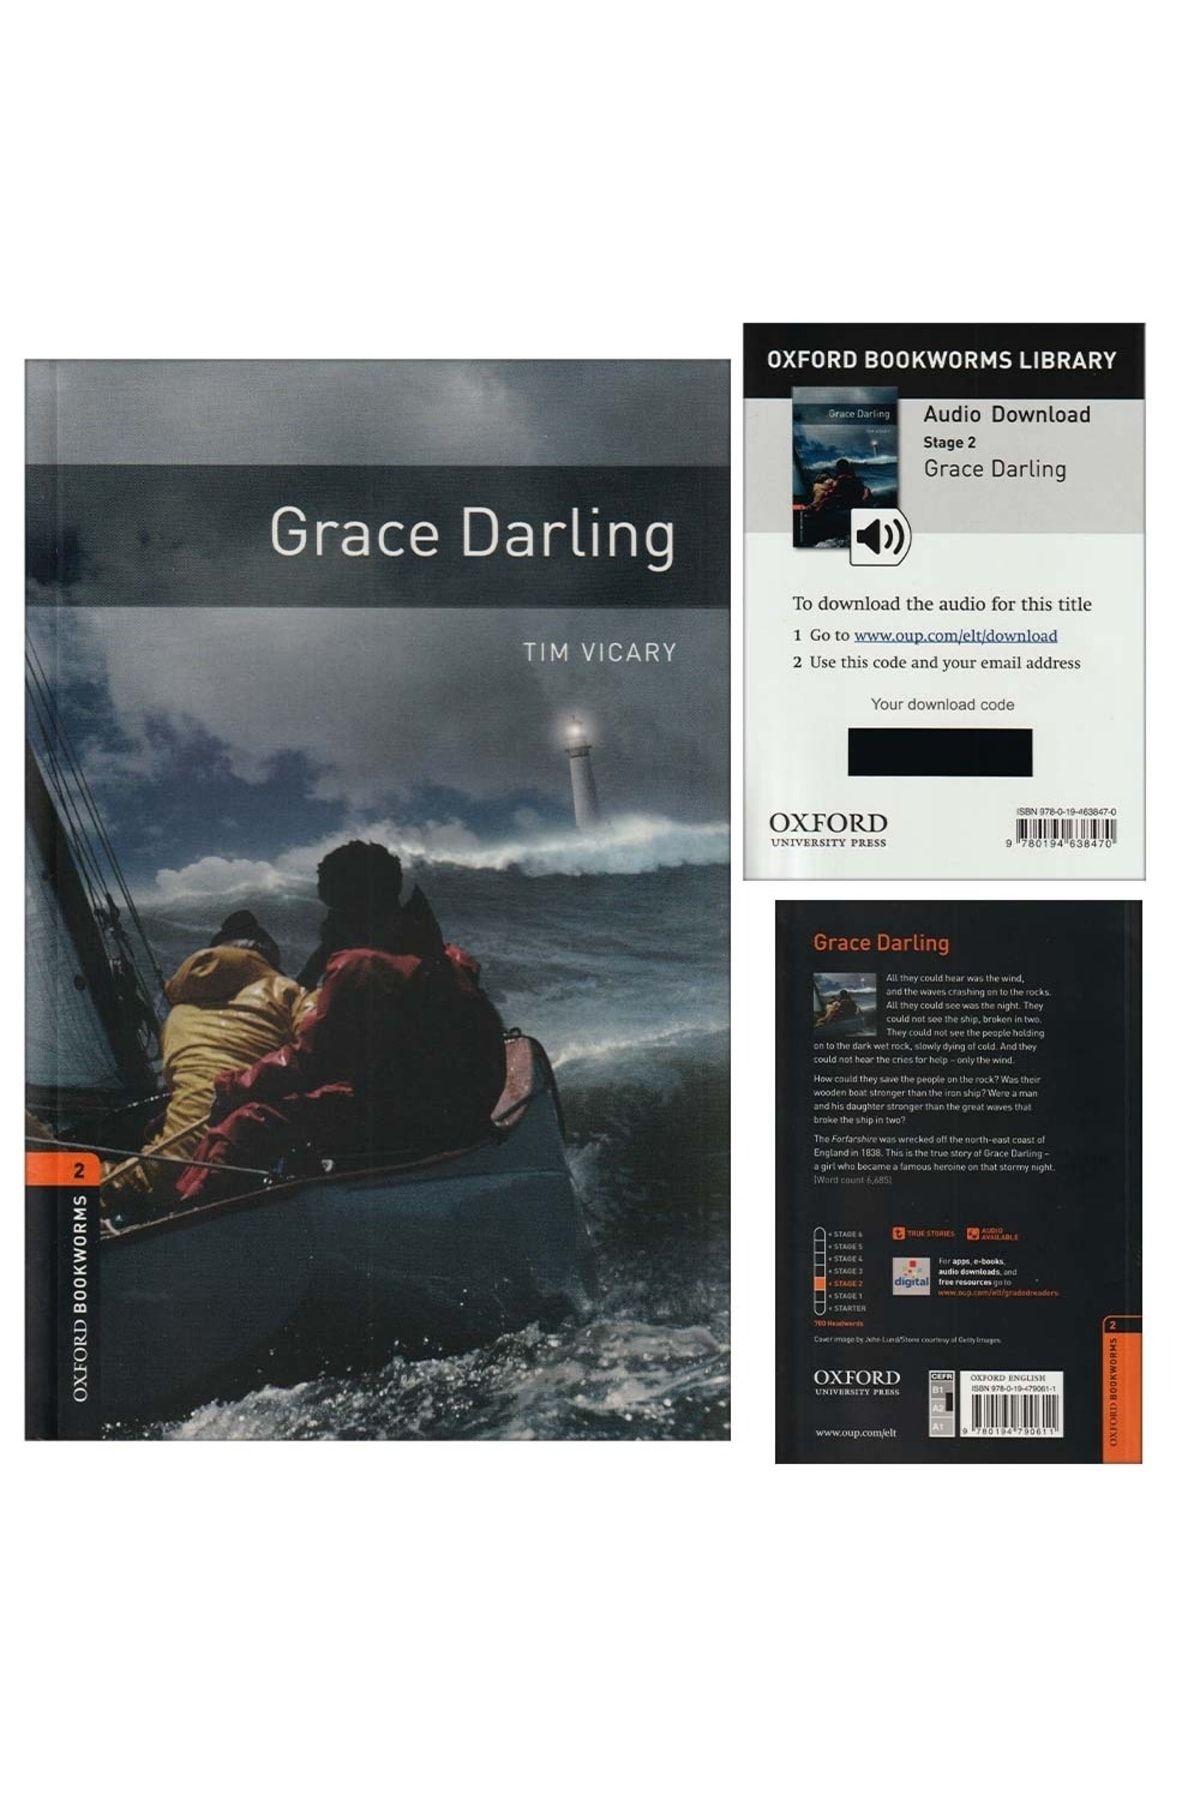 OXFORD UNIVERSITY PRESS Oxford Bookworms Library: Level 2: Grace Darling